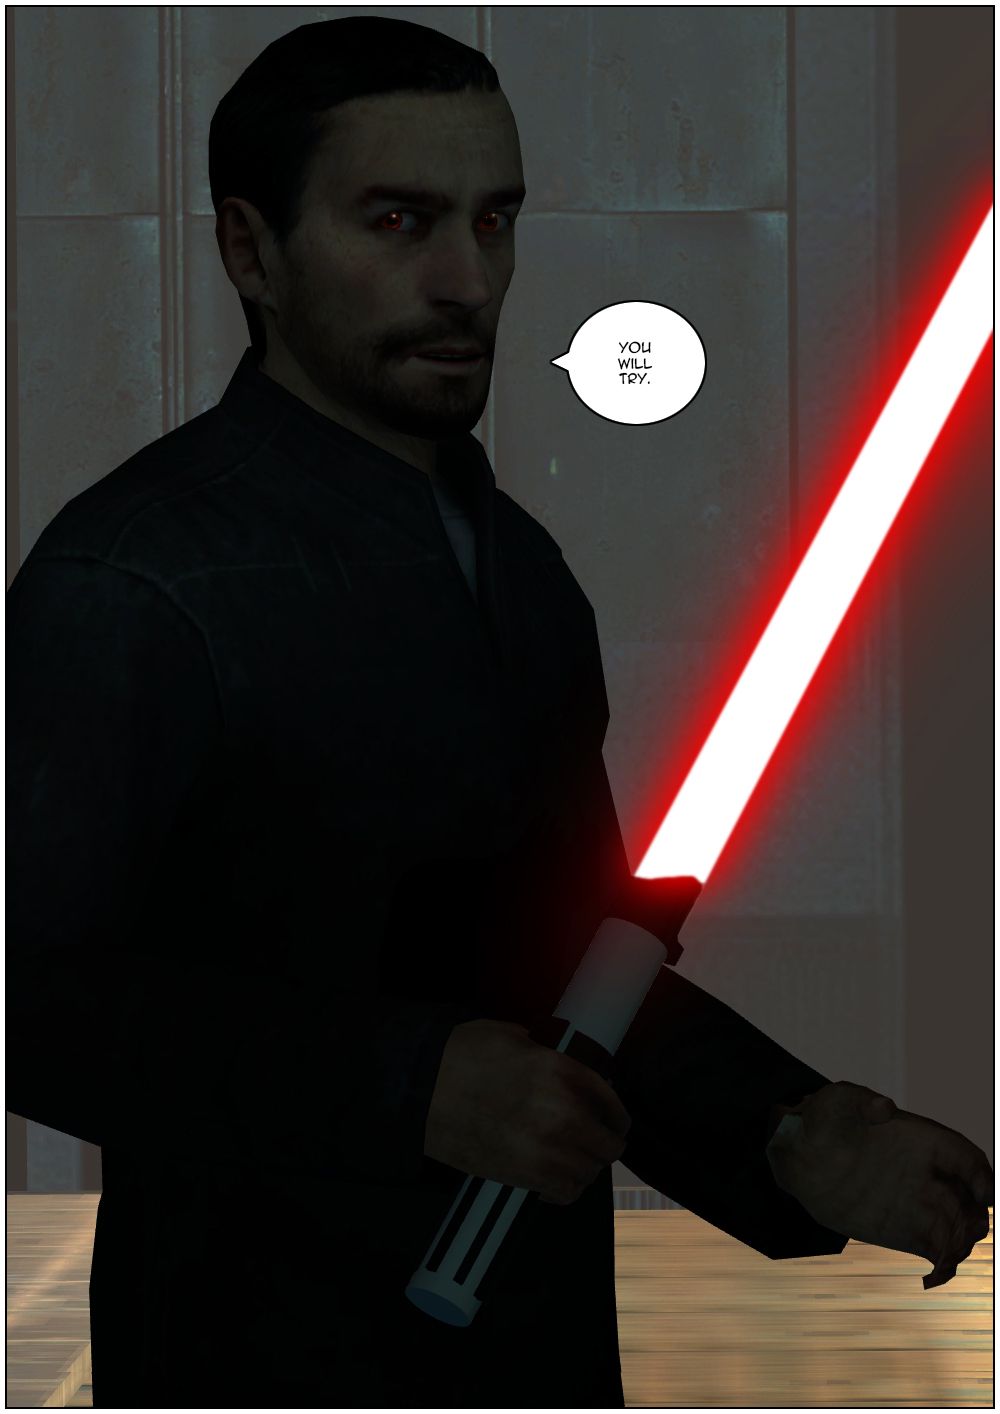 Mythos turns on his own lightsaber, which has a red blade, and turns around, revealing red eyes. He retorts that Delirium will try.